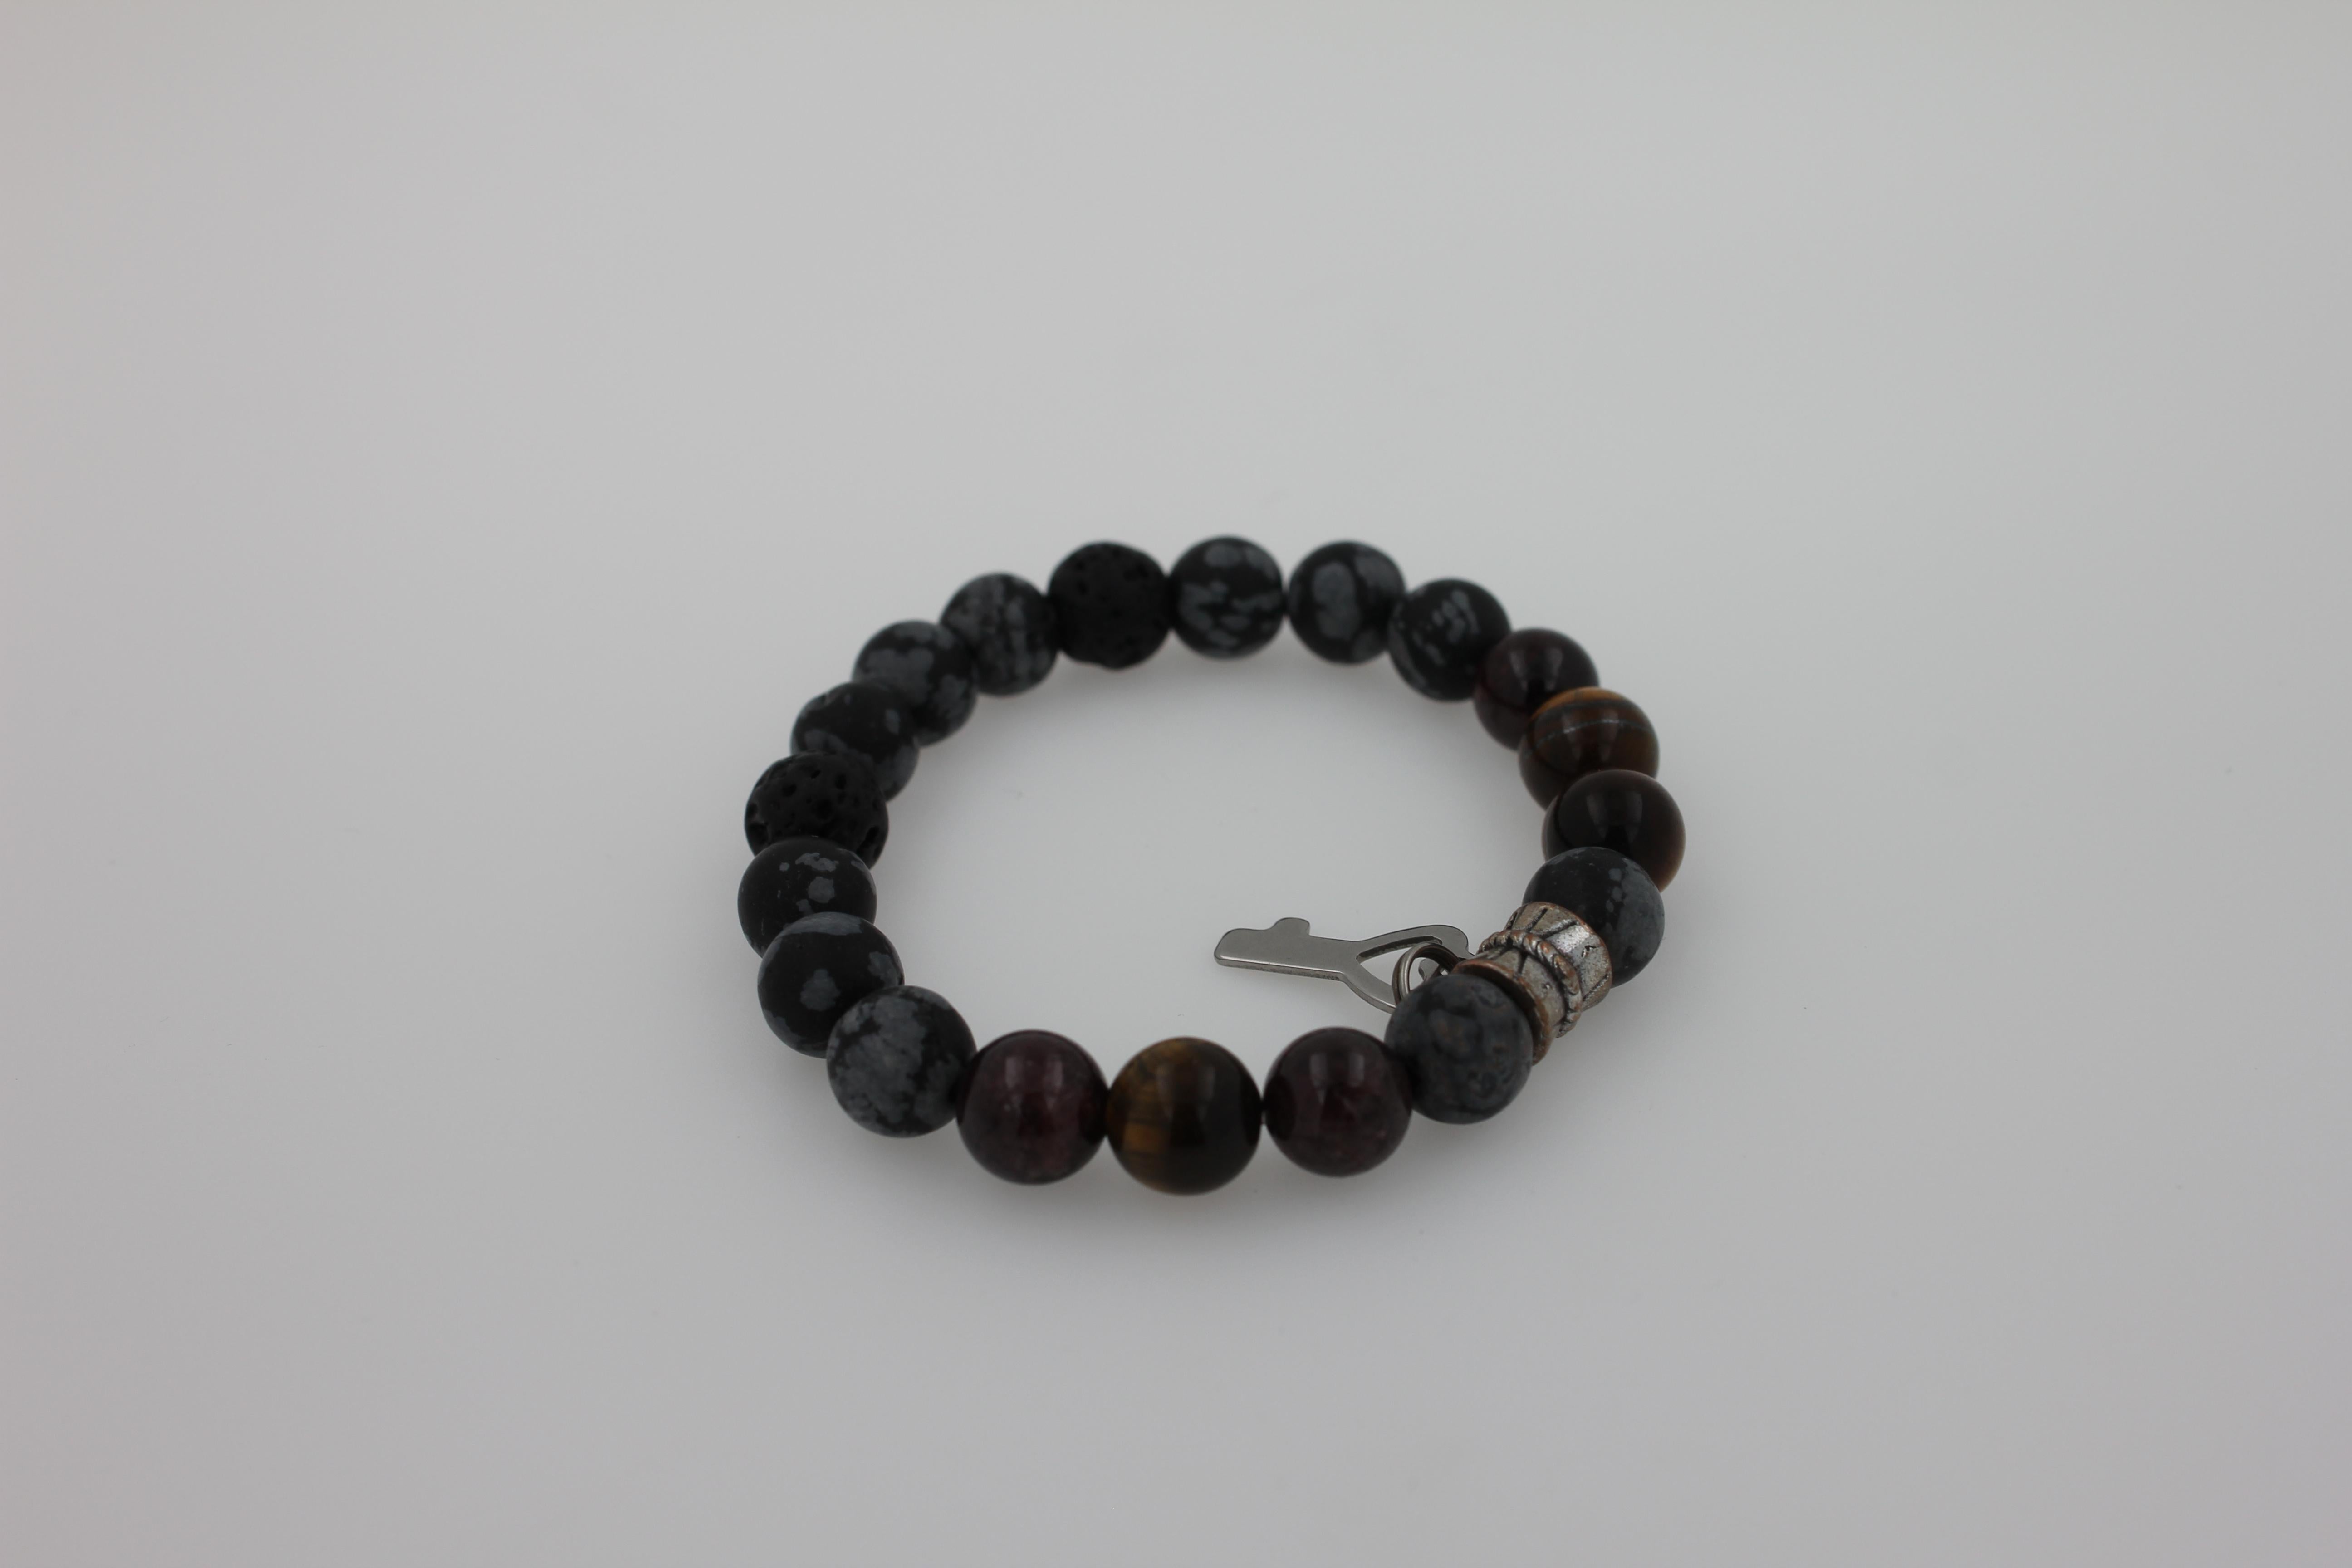 Black Agate Brown Earth Gemstone Round Chakra Beads Stretchy Unique Statement Bracelet
Size of Bracelet - Fits Wrist Sizes of 6-9 Inches (Flexible Stretching Wire)
Natural, Genuine Gemstones